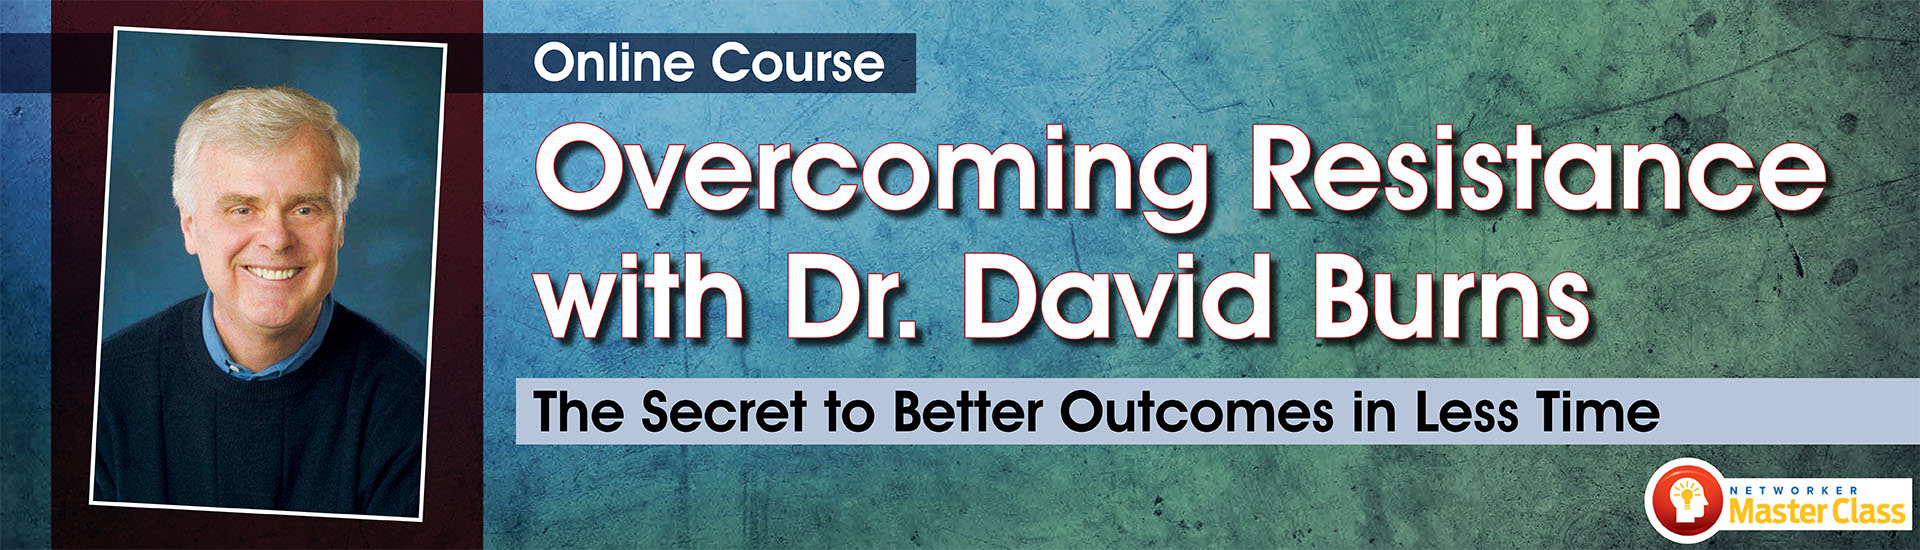 Online Course: Overcoming Resistance with Dr. David Burns